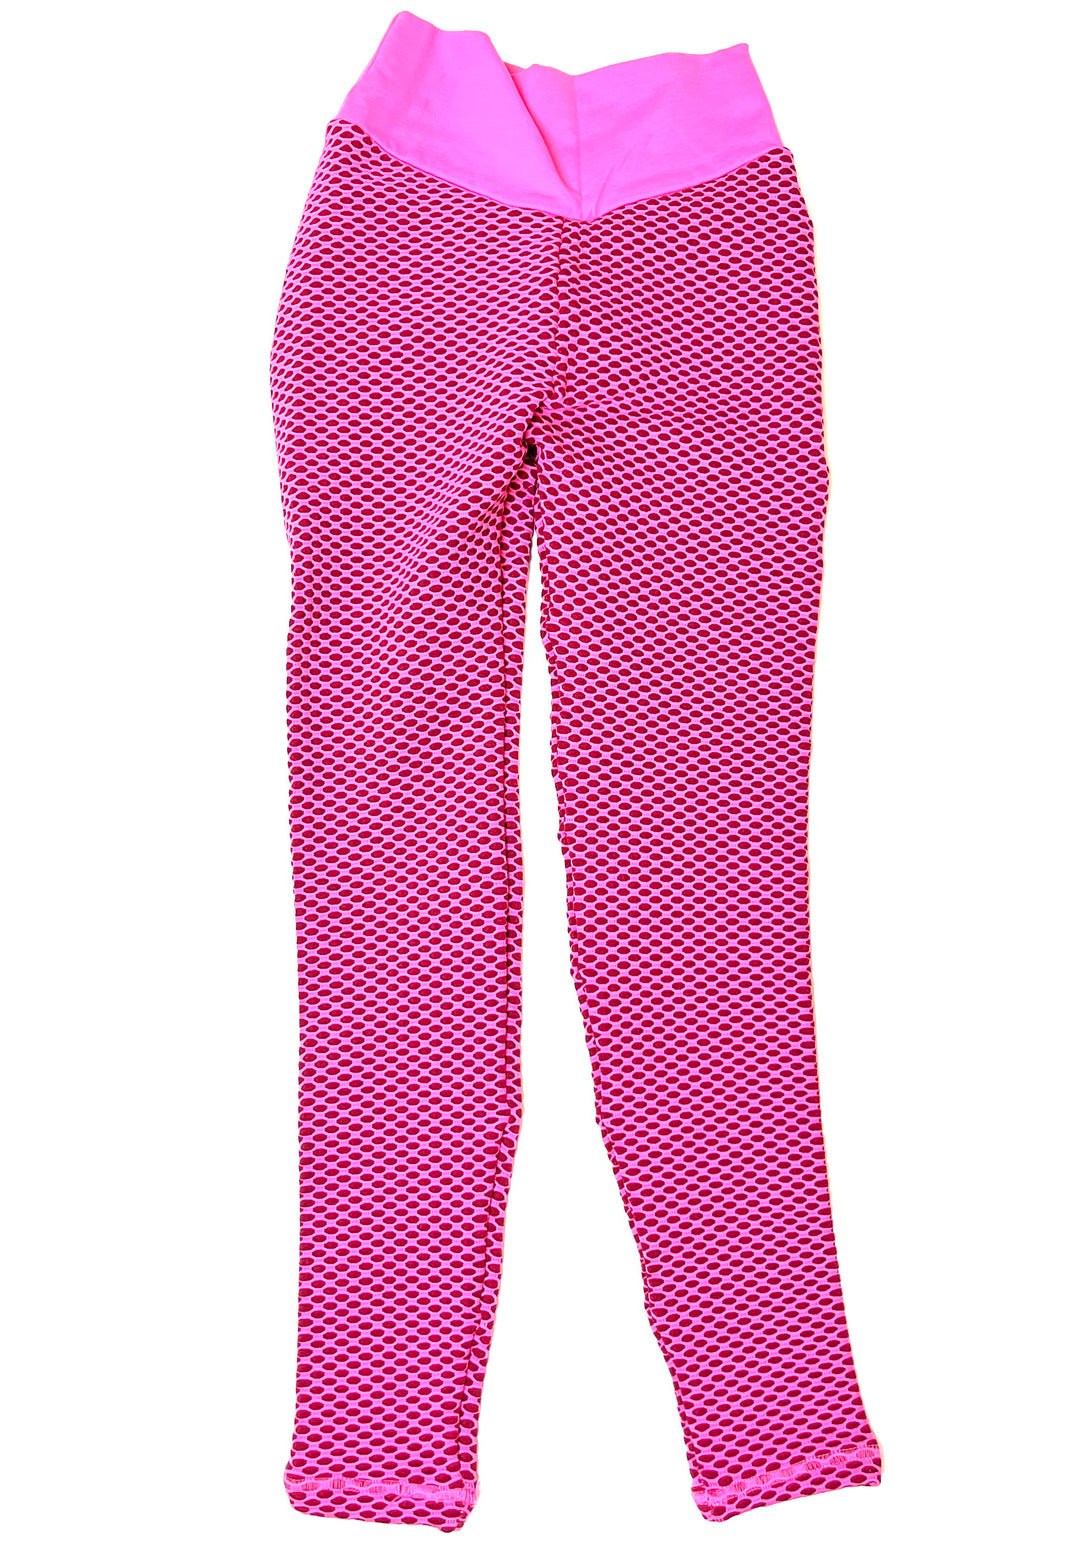 Pink Textured Leggings - Size 000/00 and 0/2